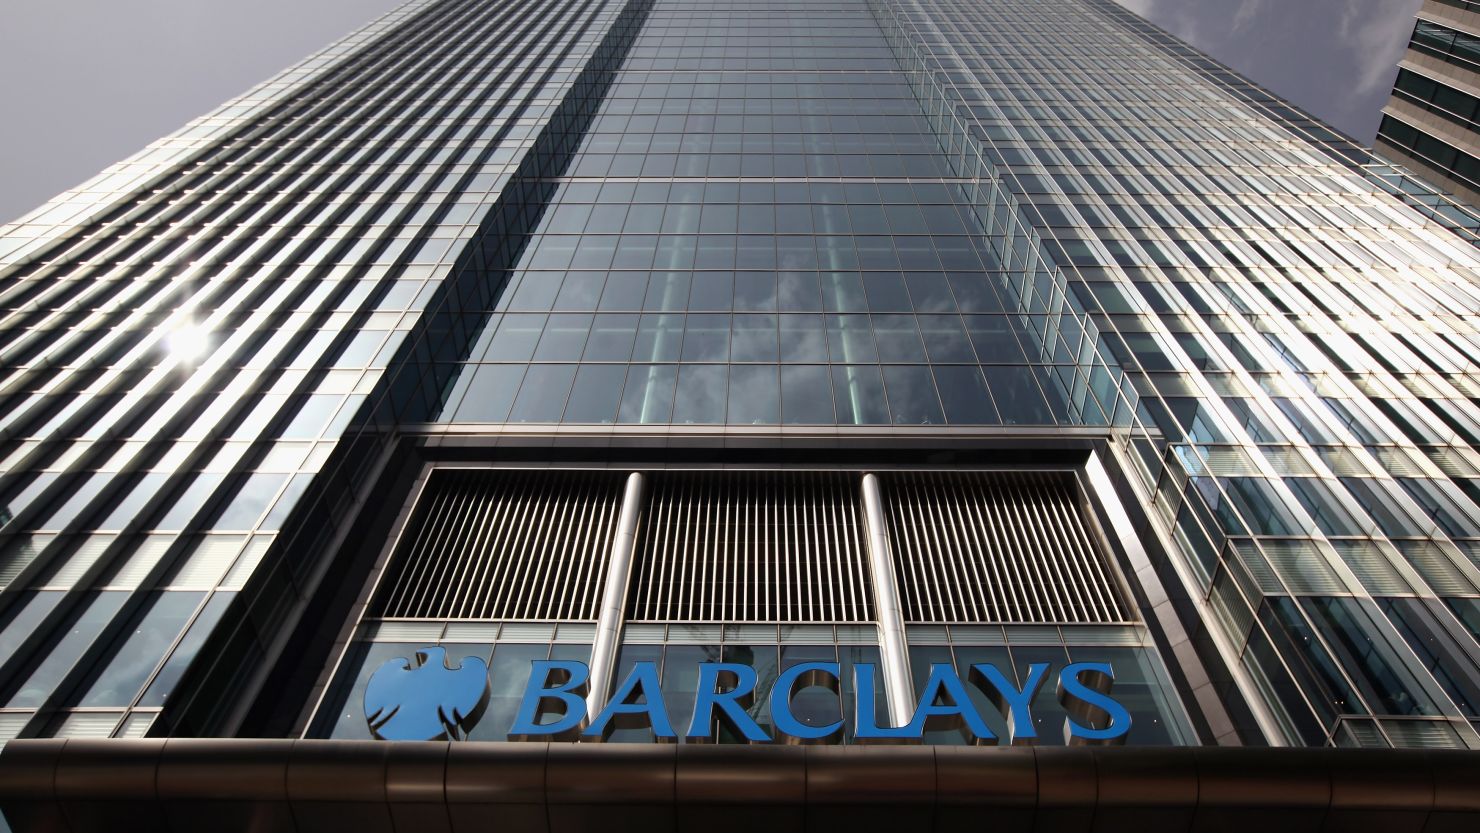 Barclays announced that underlying first-half pre-tax profit rose 13 per cent to £4.23bn.